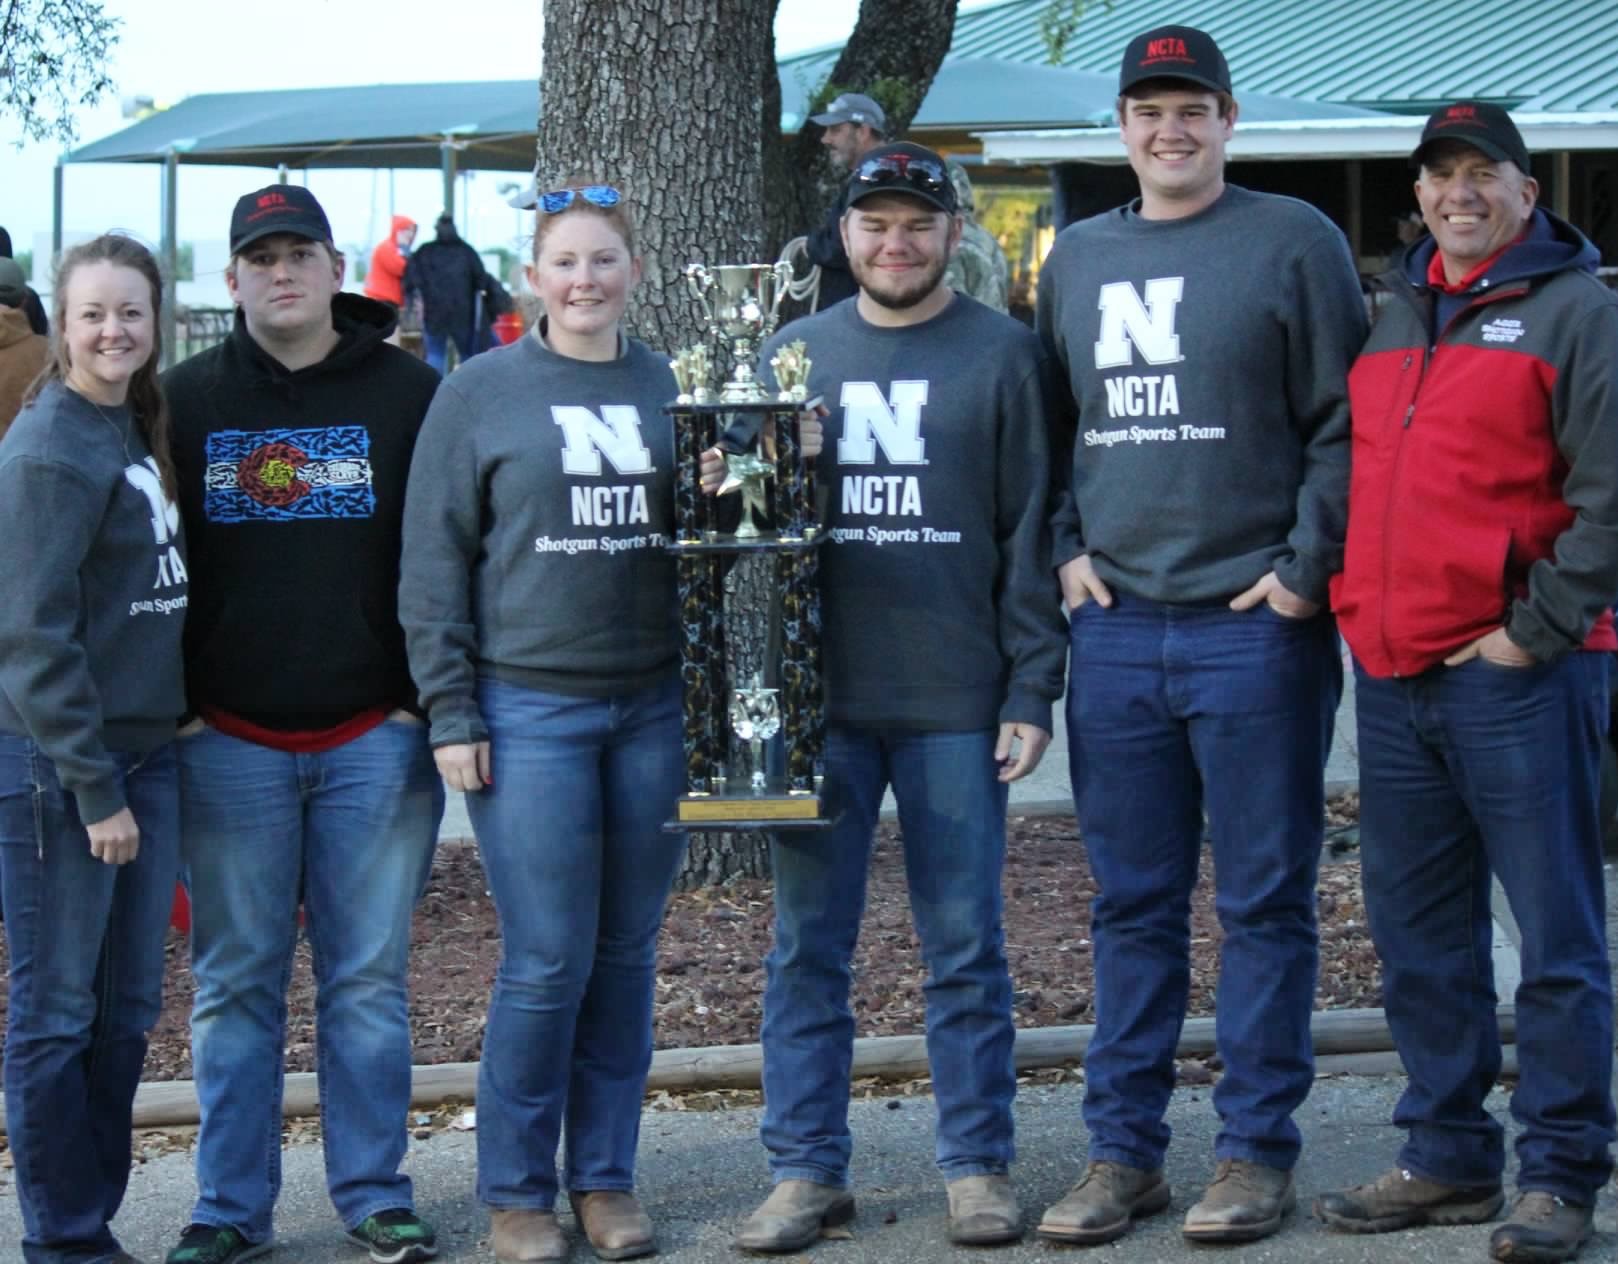 The NCTA Aggie Shooting Sports team, from left, Angela Crouse, Trevor Kuhn, Kaylee Hostler, David Jelken, Chase Stanley, and Coach Alan Taylor. (Jody Crouse photo)